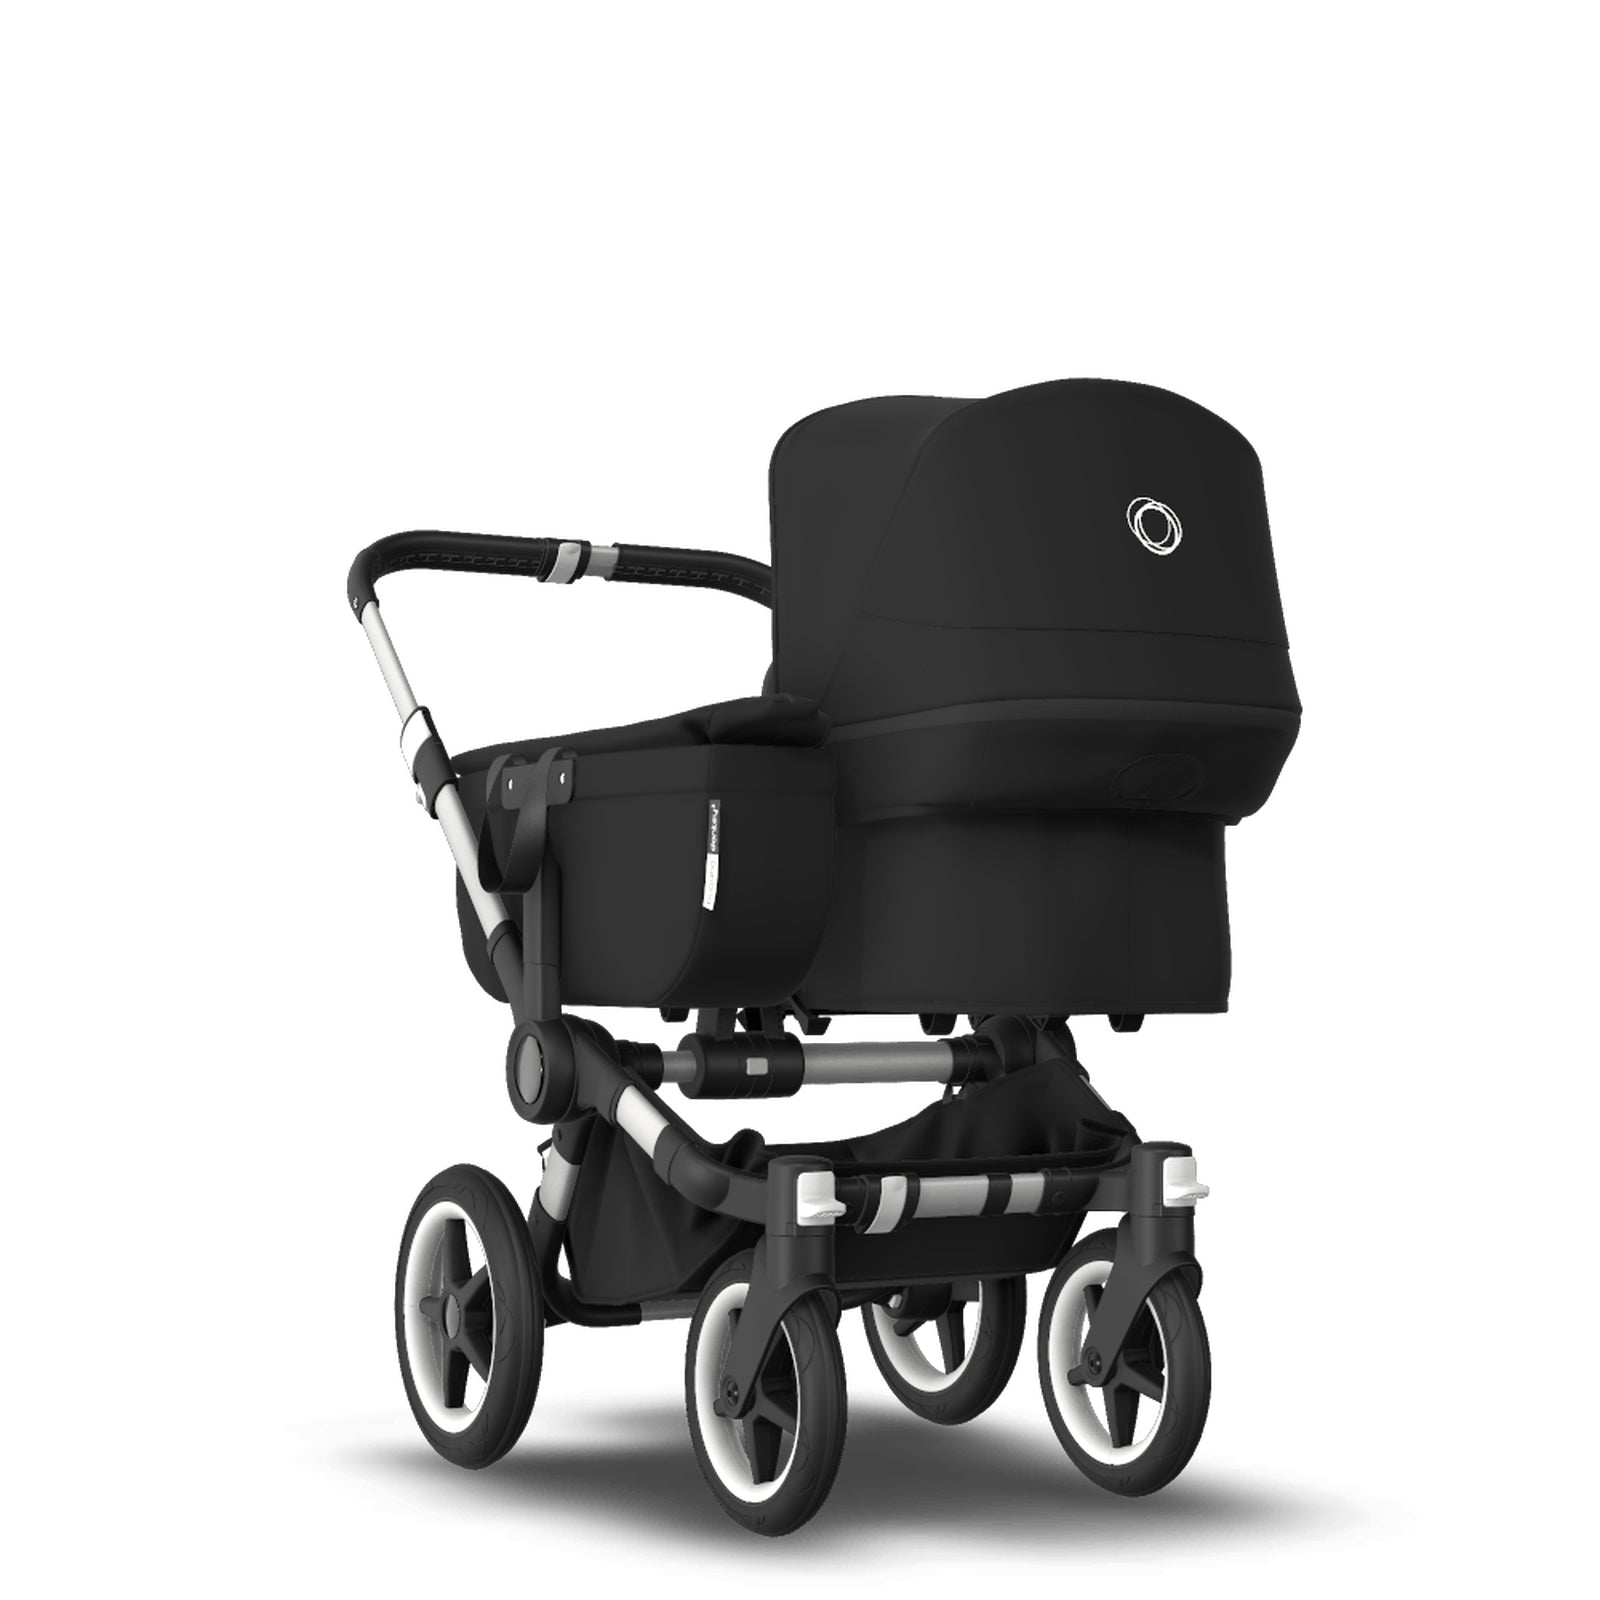 Bugaboo Donkey 3 Mono Seat and Carrycot Pushchair - Black